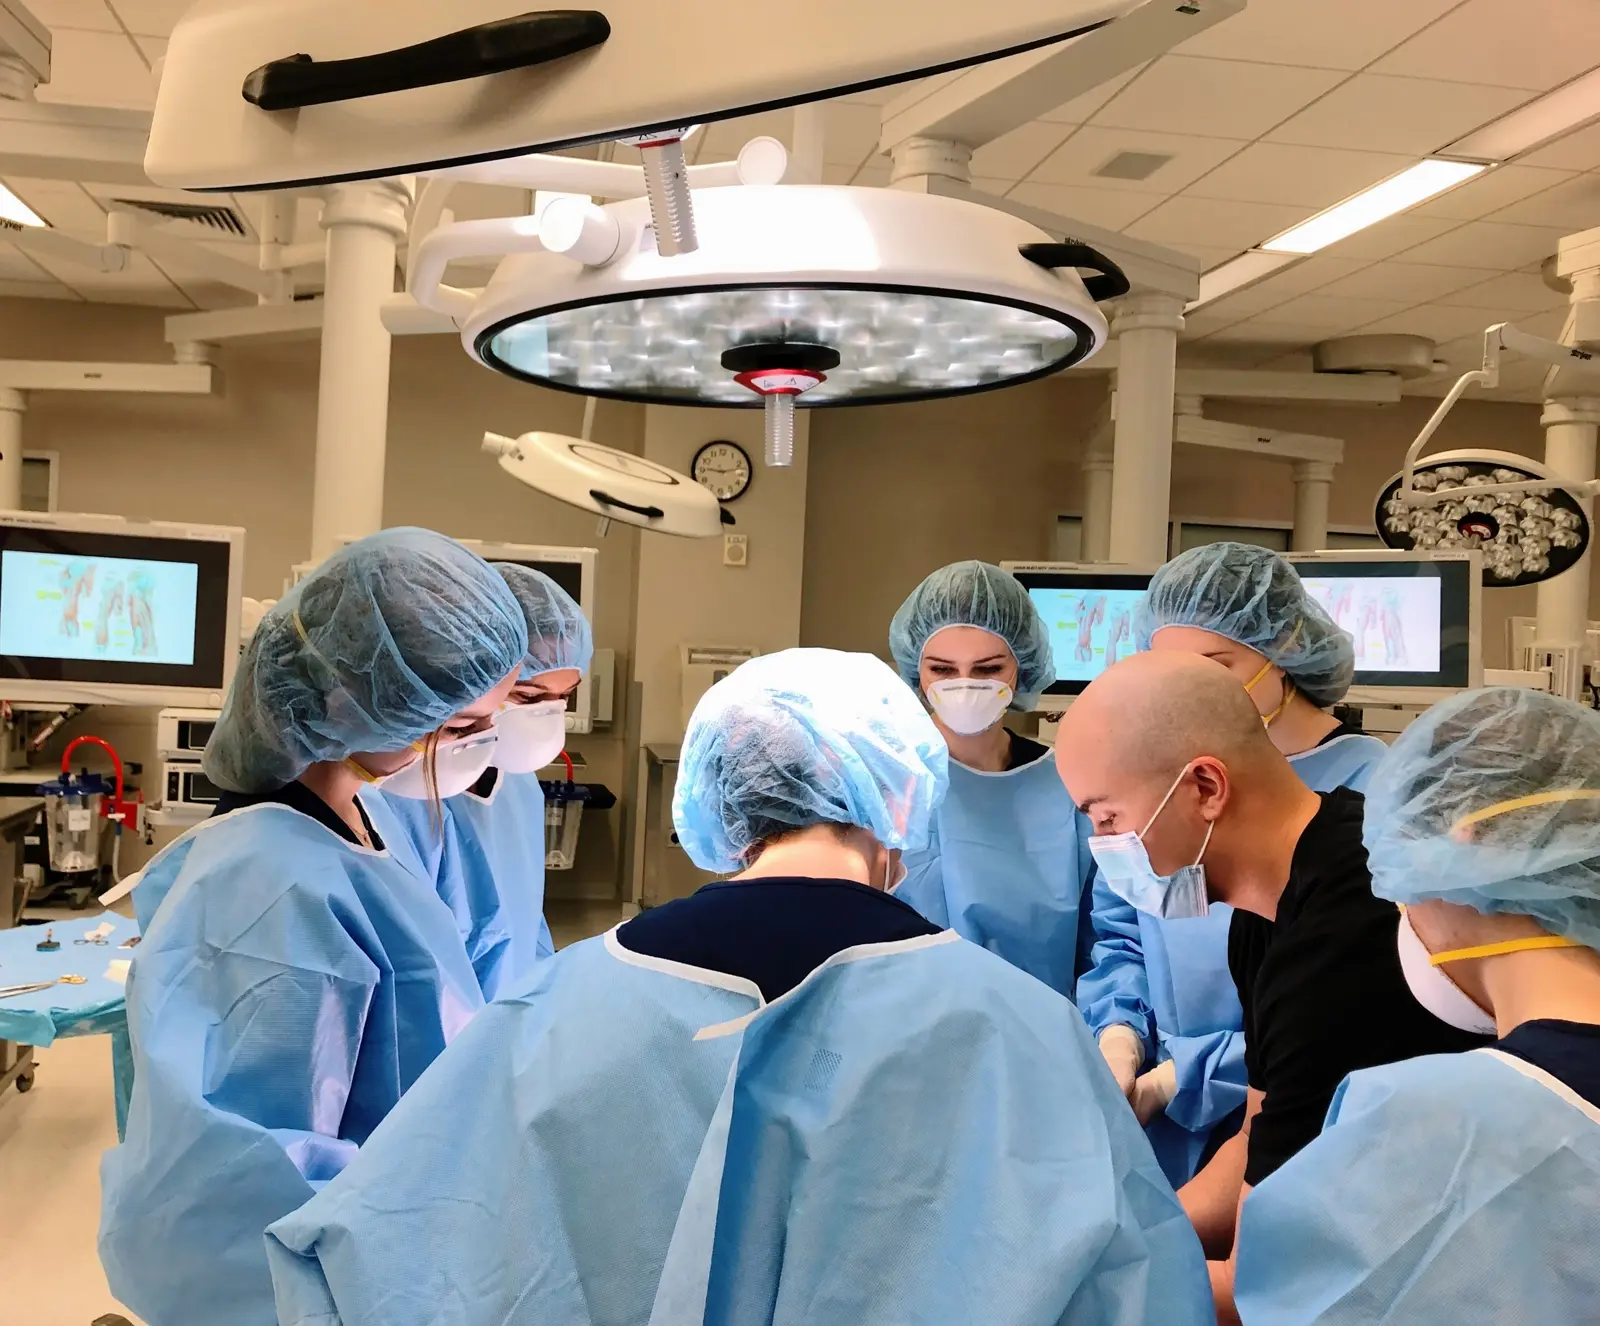 CAMLS A group of healthcare professionals wearing blue surgical gowns, masks, and hairnets are gathered around an operating table under a large surgical light in a modern operating room. They appear to be performing a medical procedure.